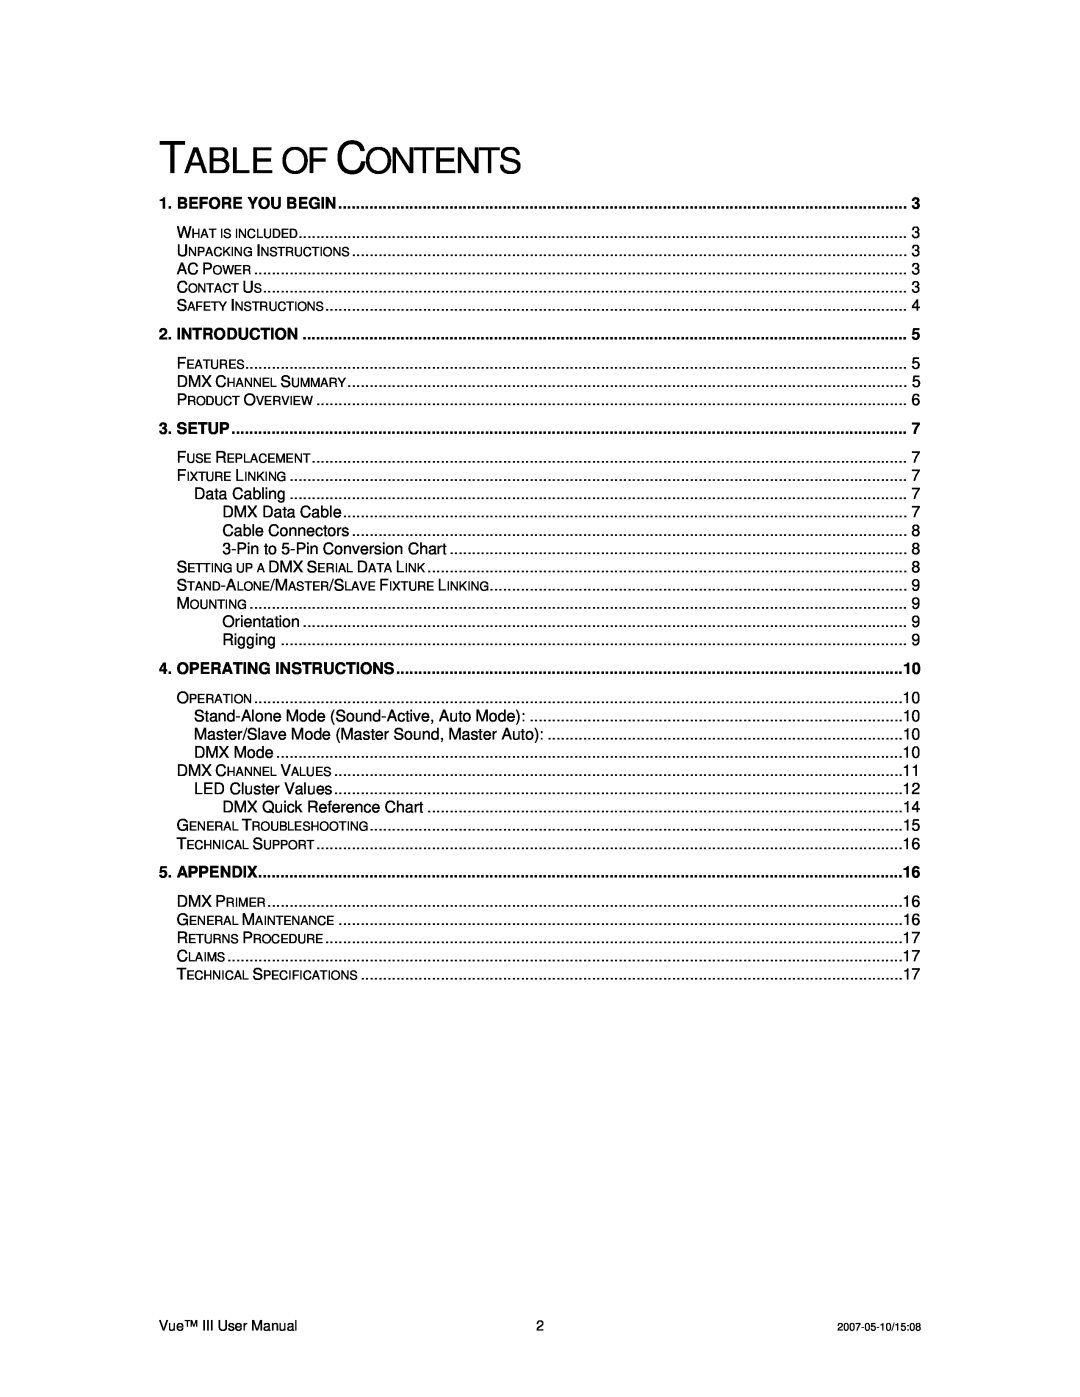 Chauvet Vue III user service Table Of Contents, Before You Begin, Introduction, Setup, Operating Instructions, Appendix 